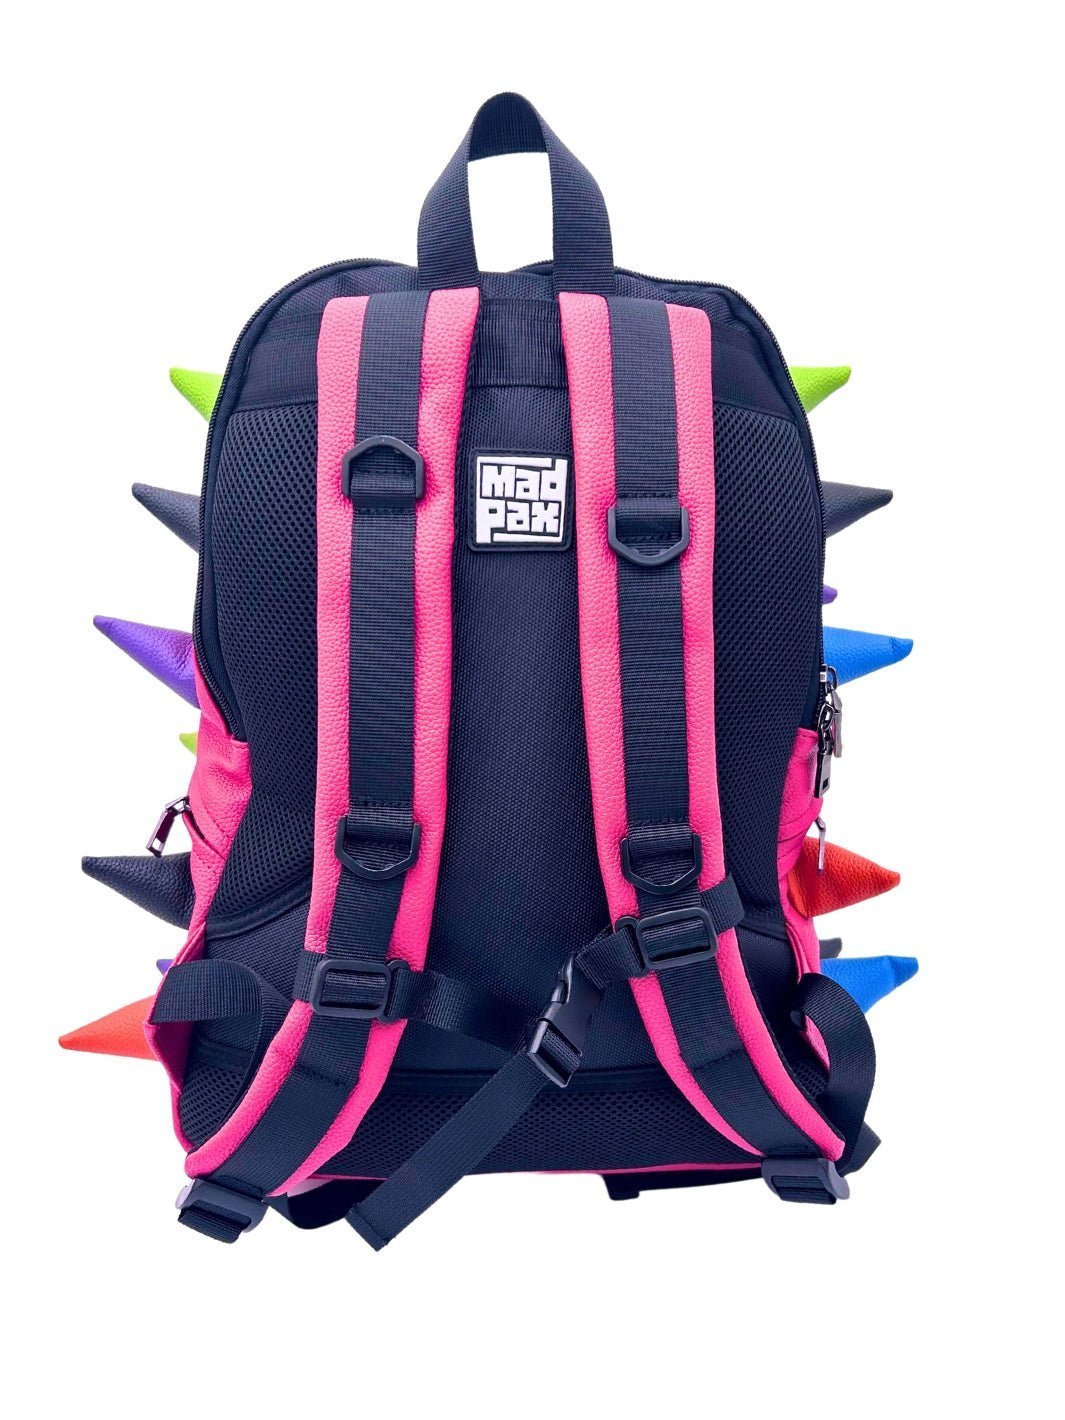 Back View of Streamers Hot Pink Backpack - Madpax